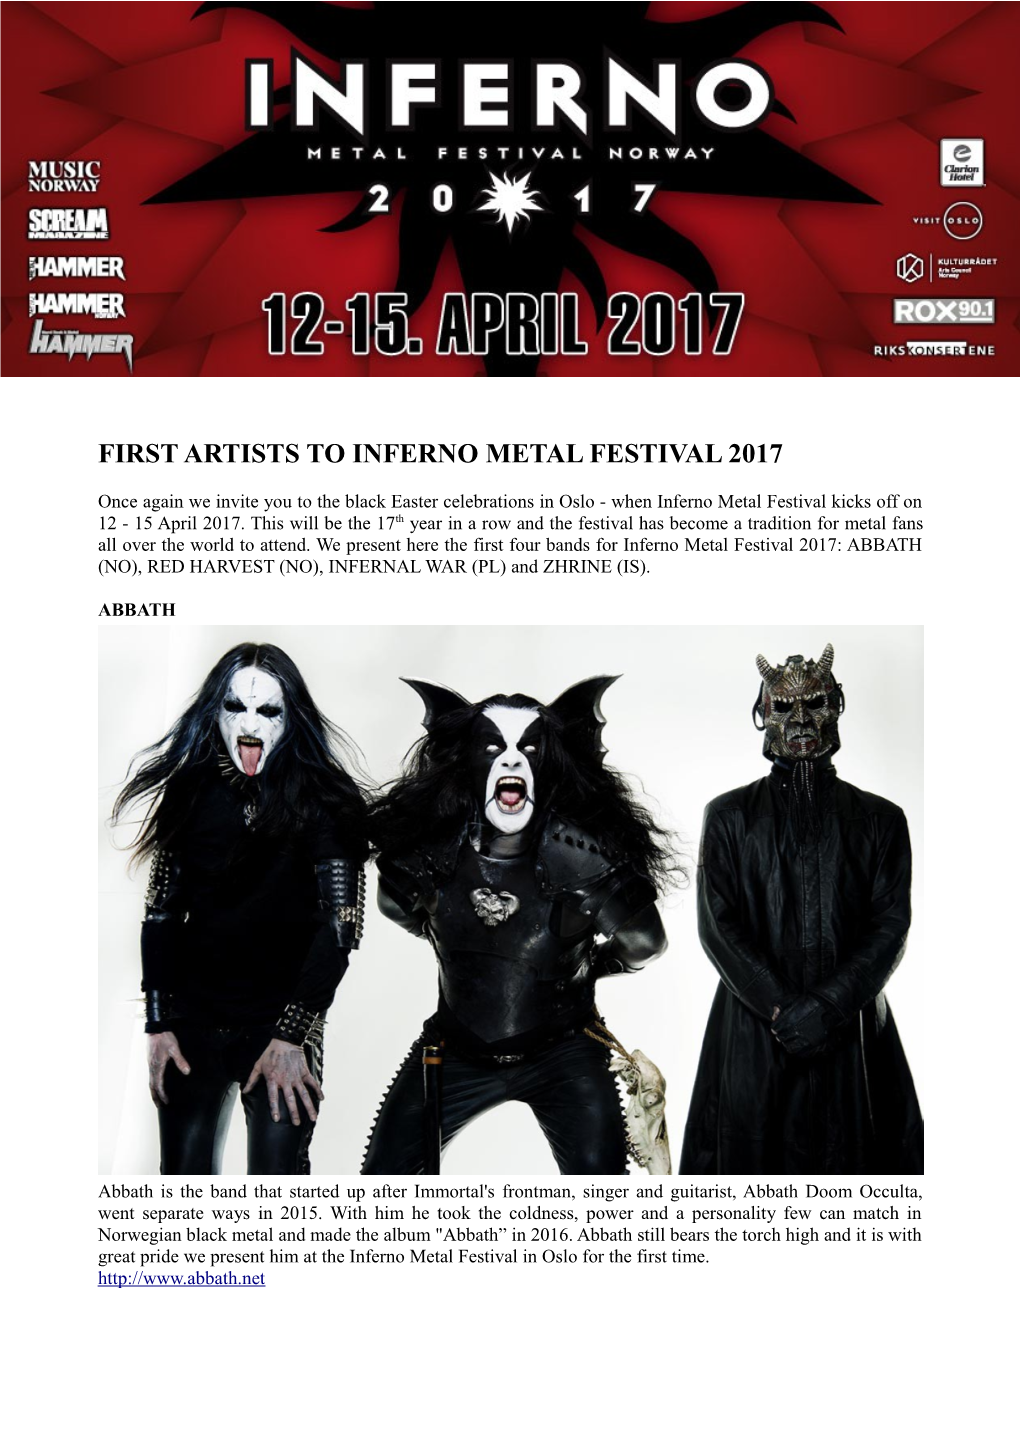 First Artists to Inferno Metal Festival 2017